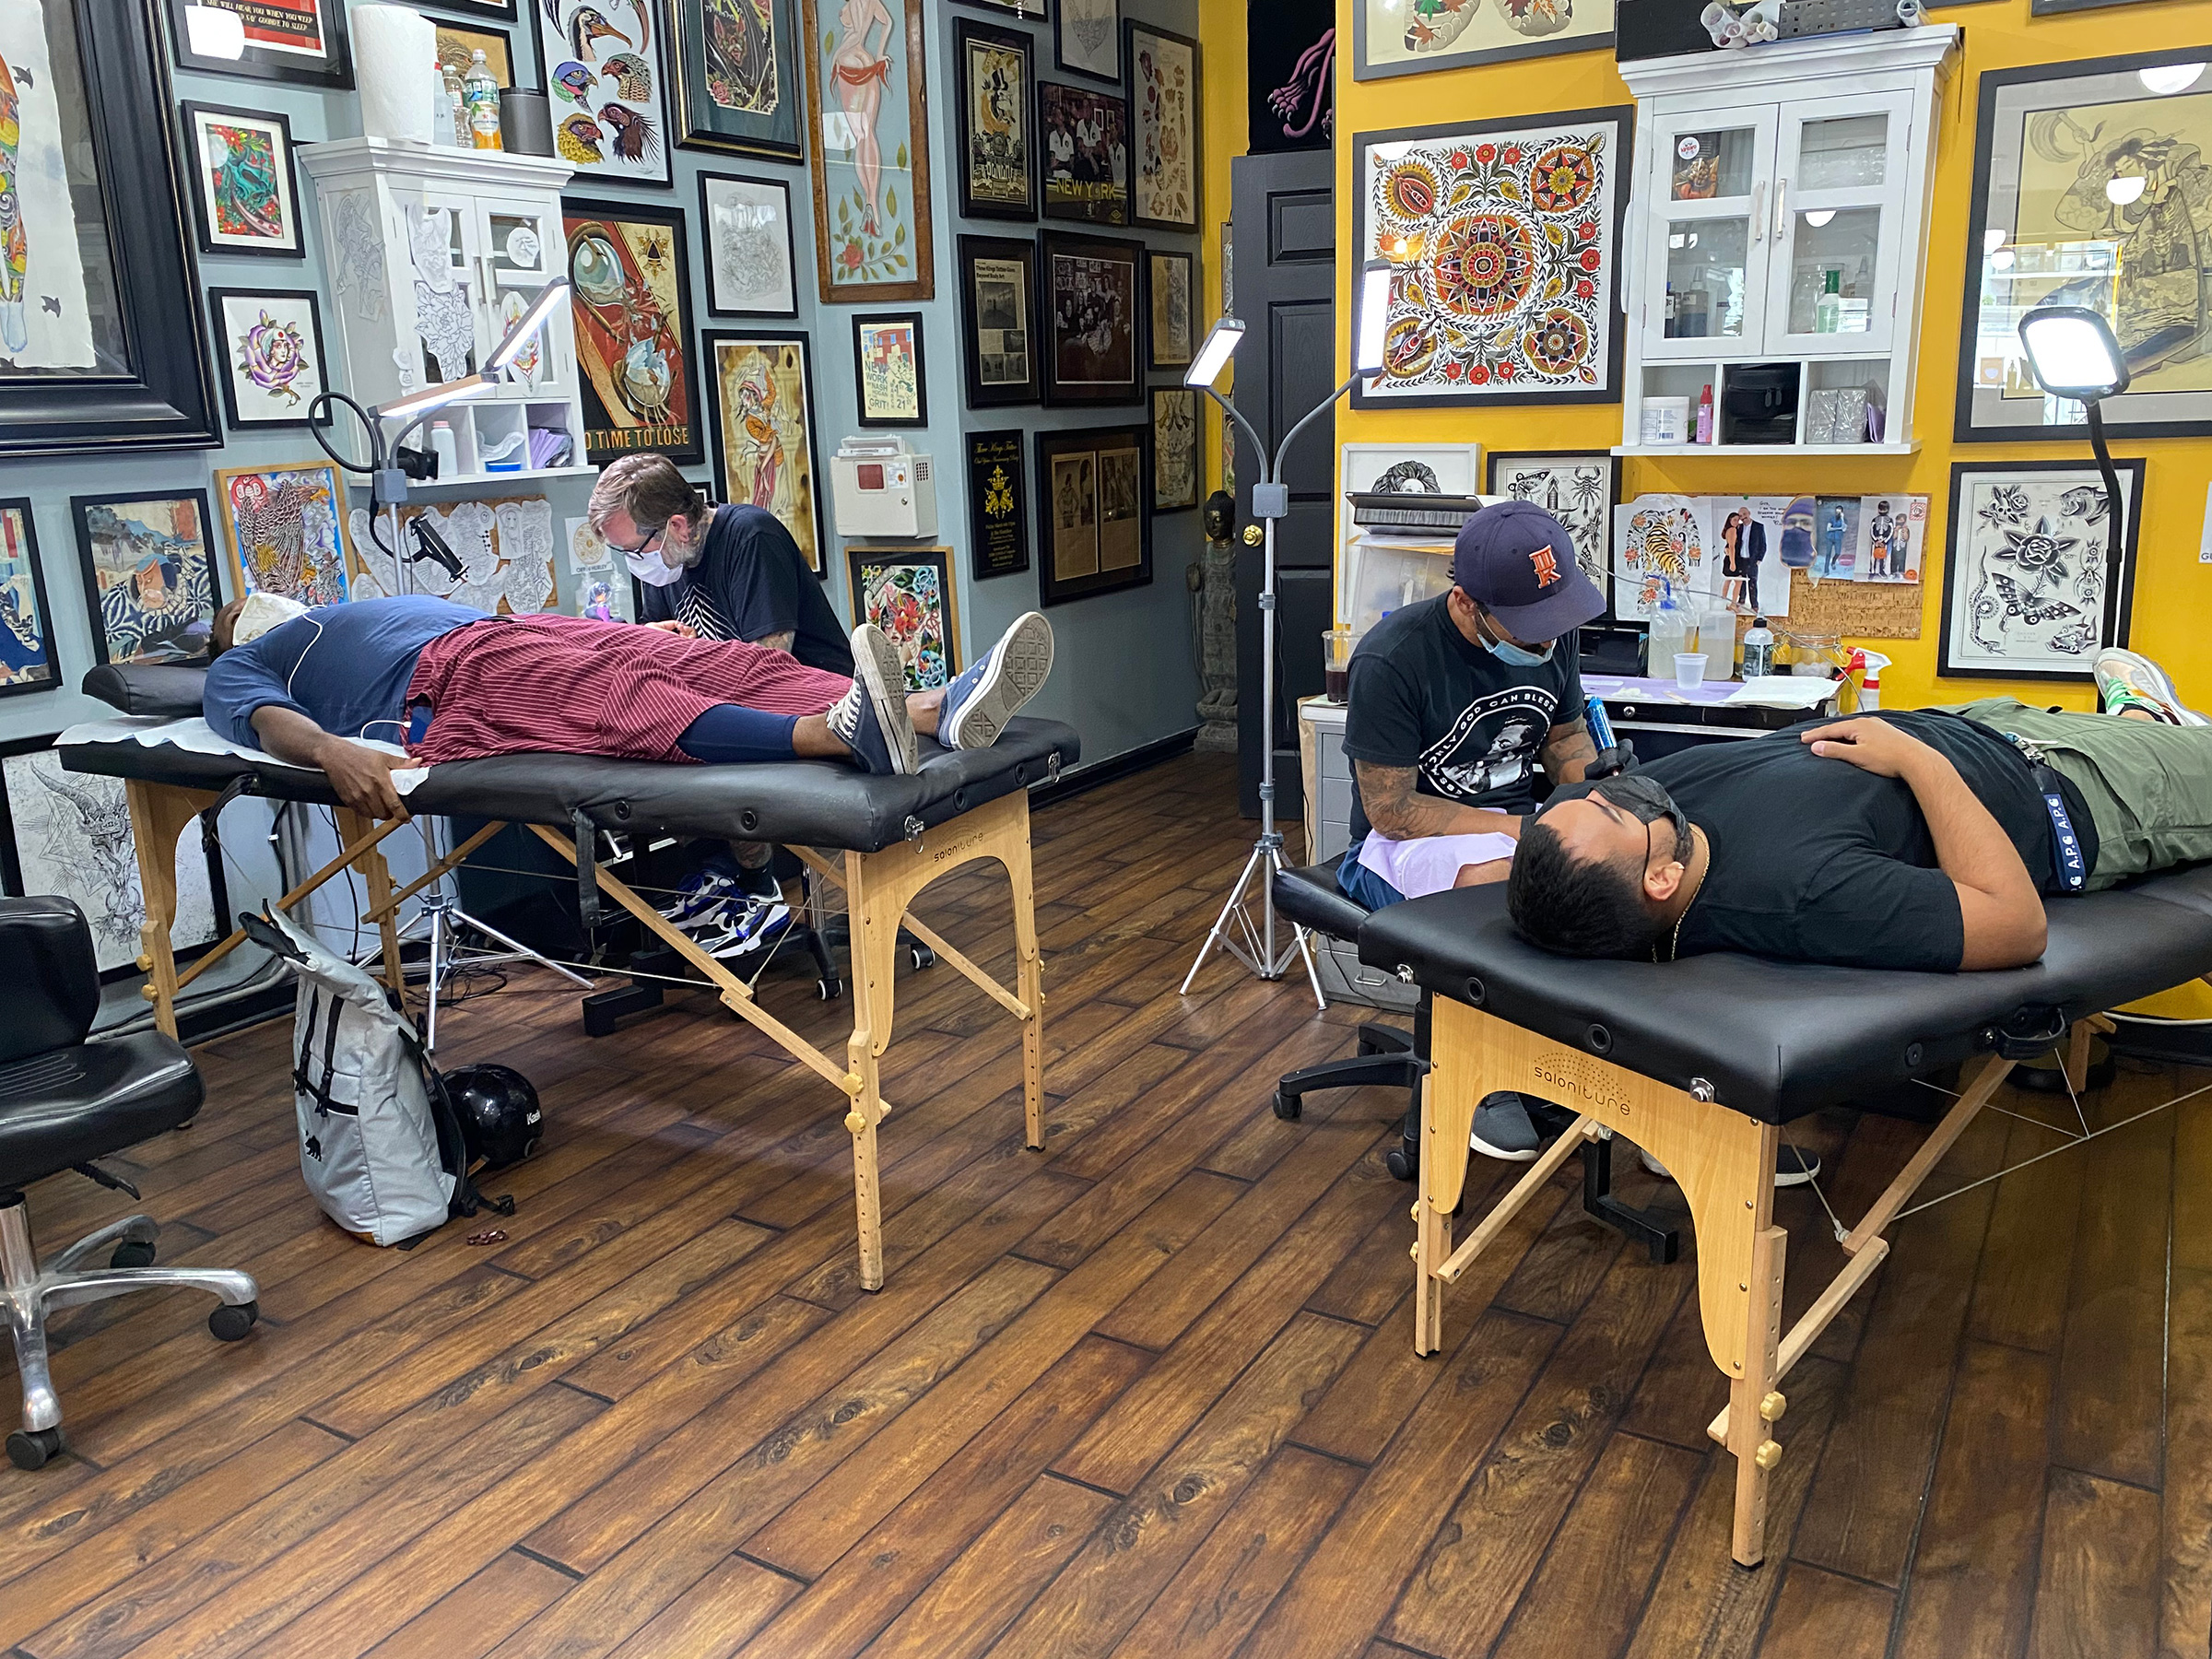 Tattoo Studios Are Booming While Other Businesses Struggle | Time